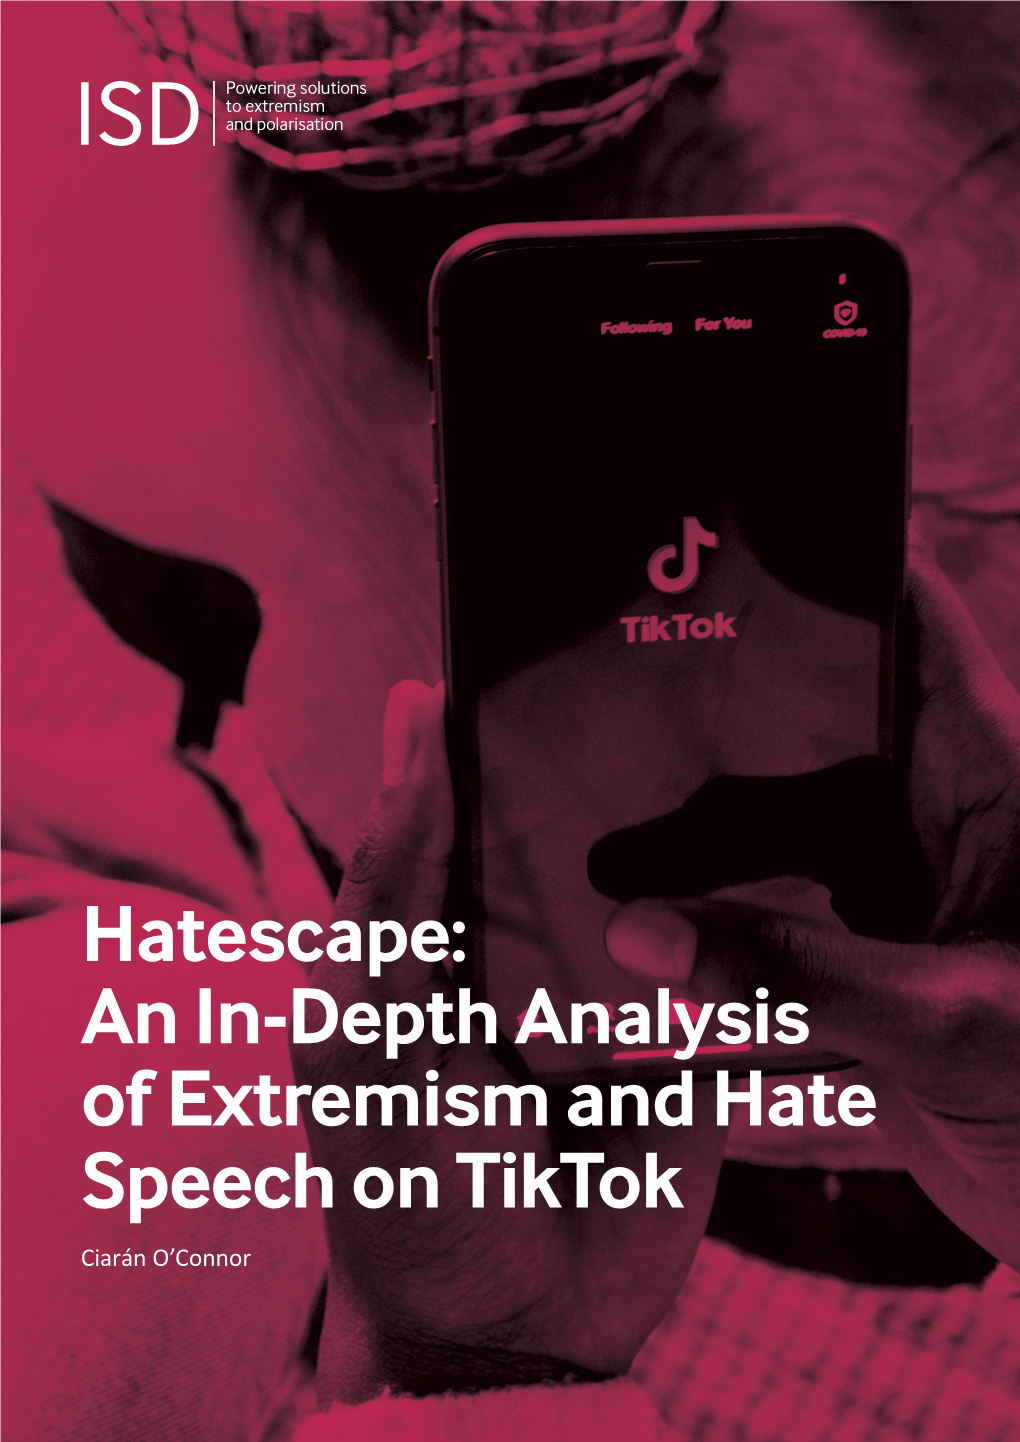 An In-Depth Analysis of Extremism and Hate Speech on Tiktok